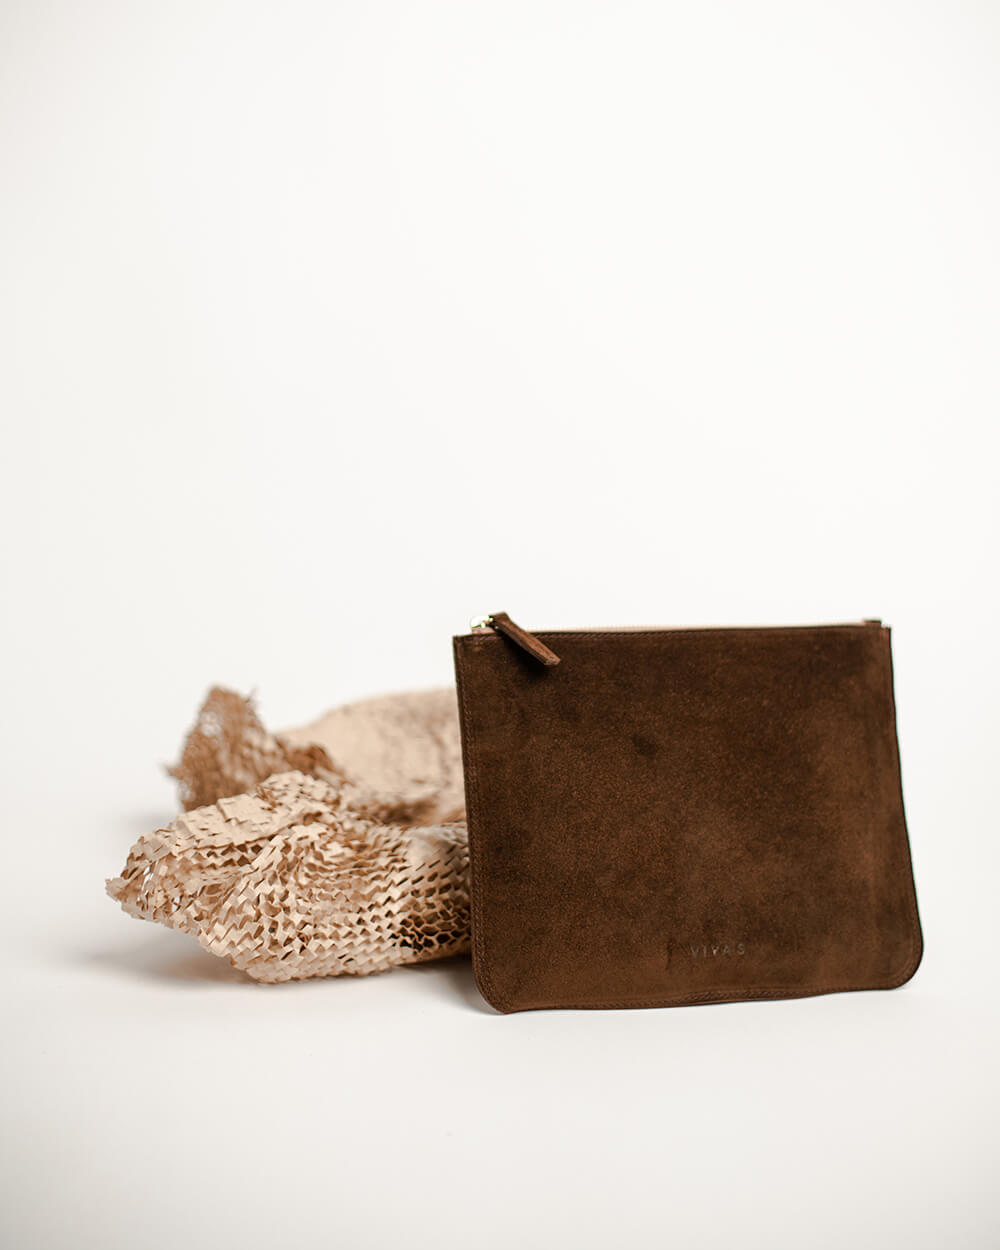 POUCH BAG LARGE brown suede